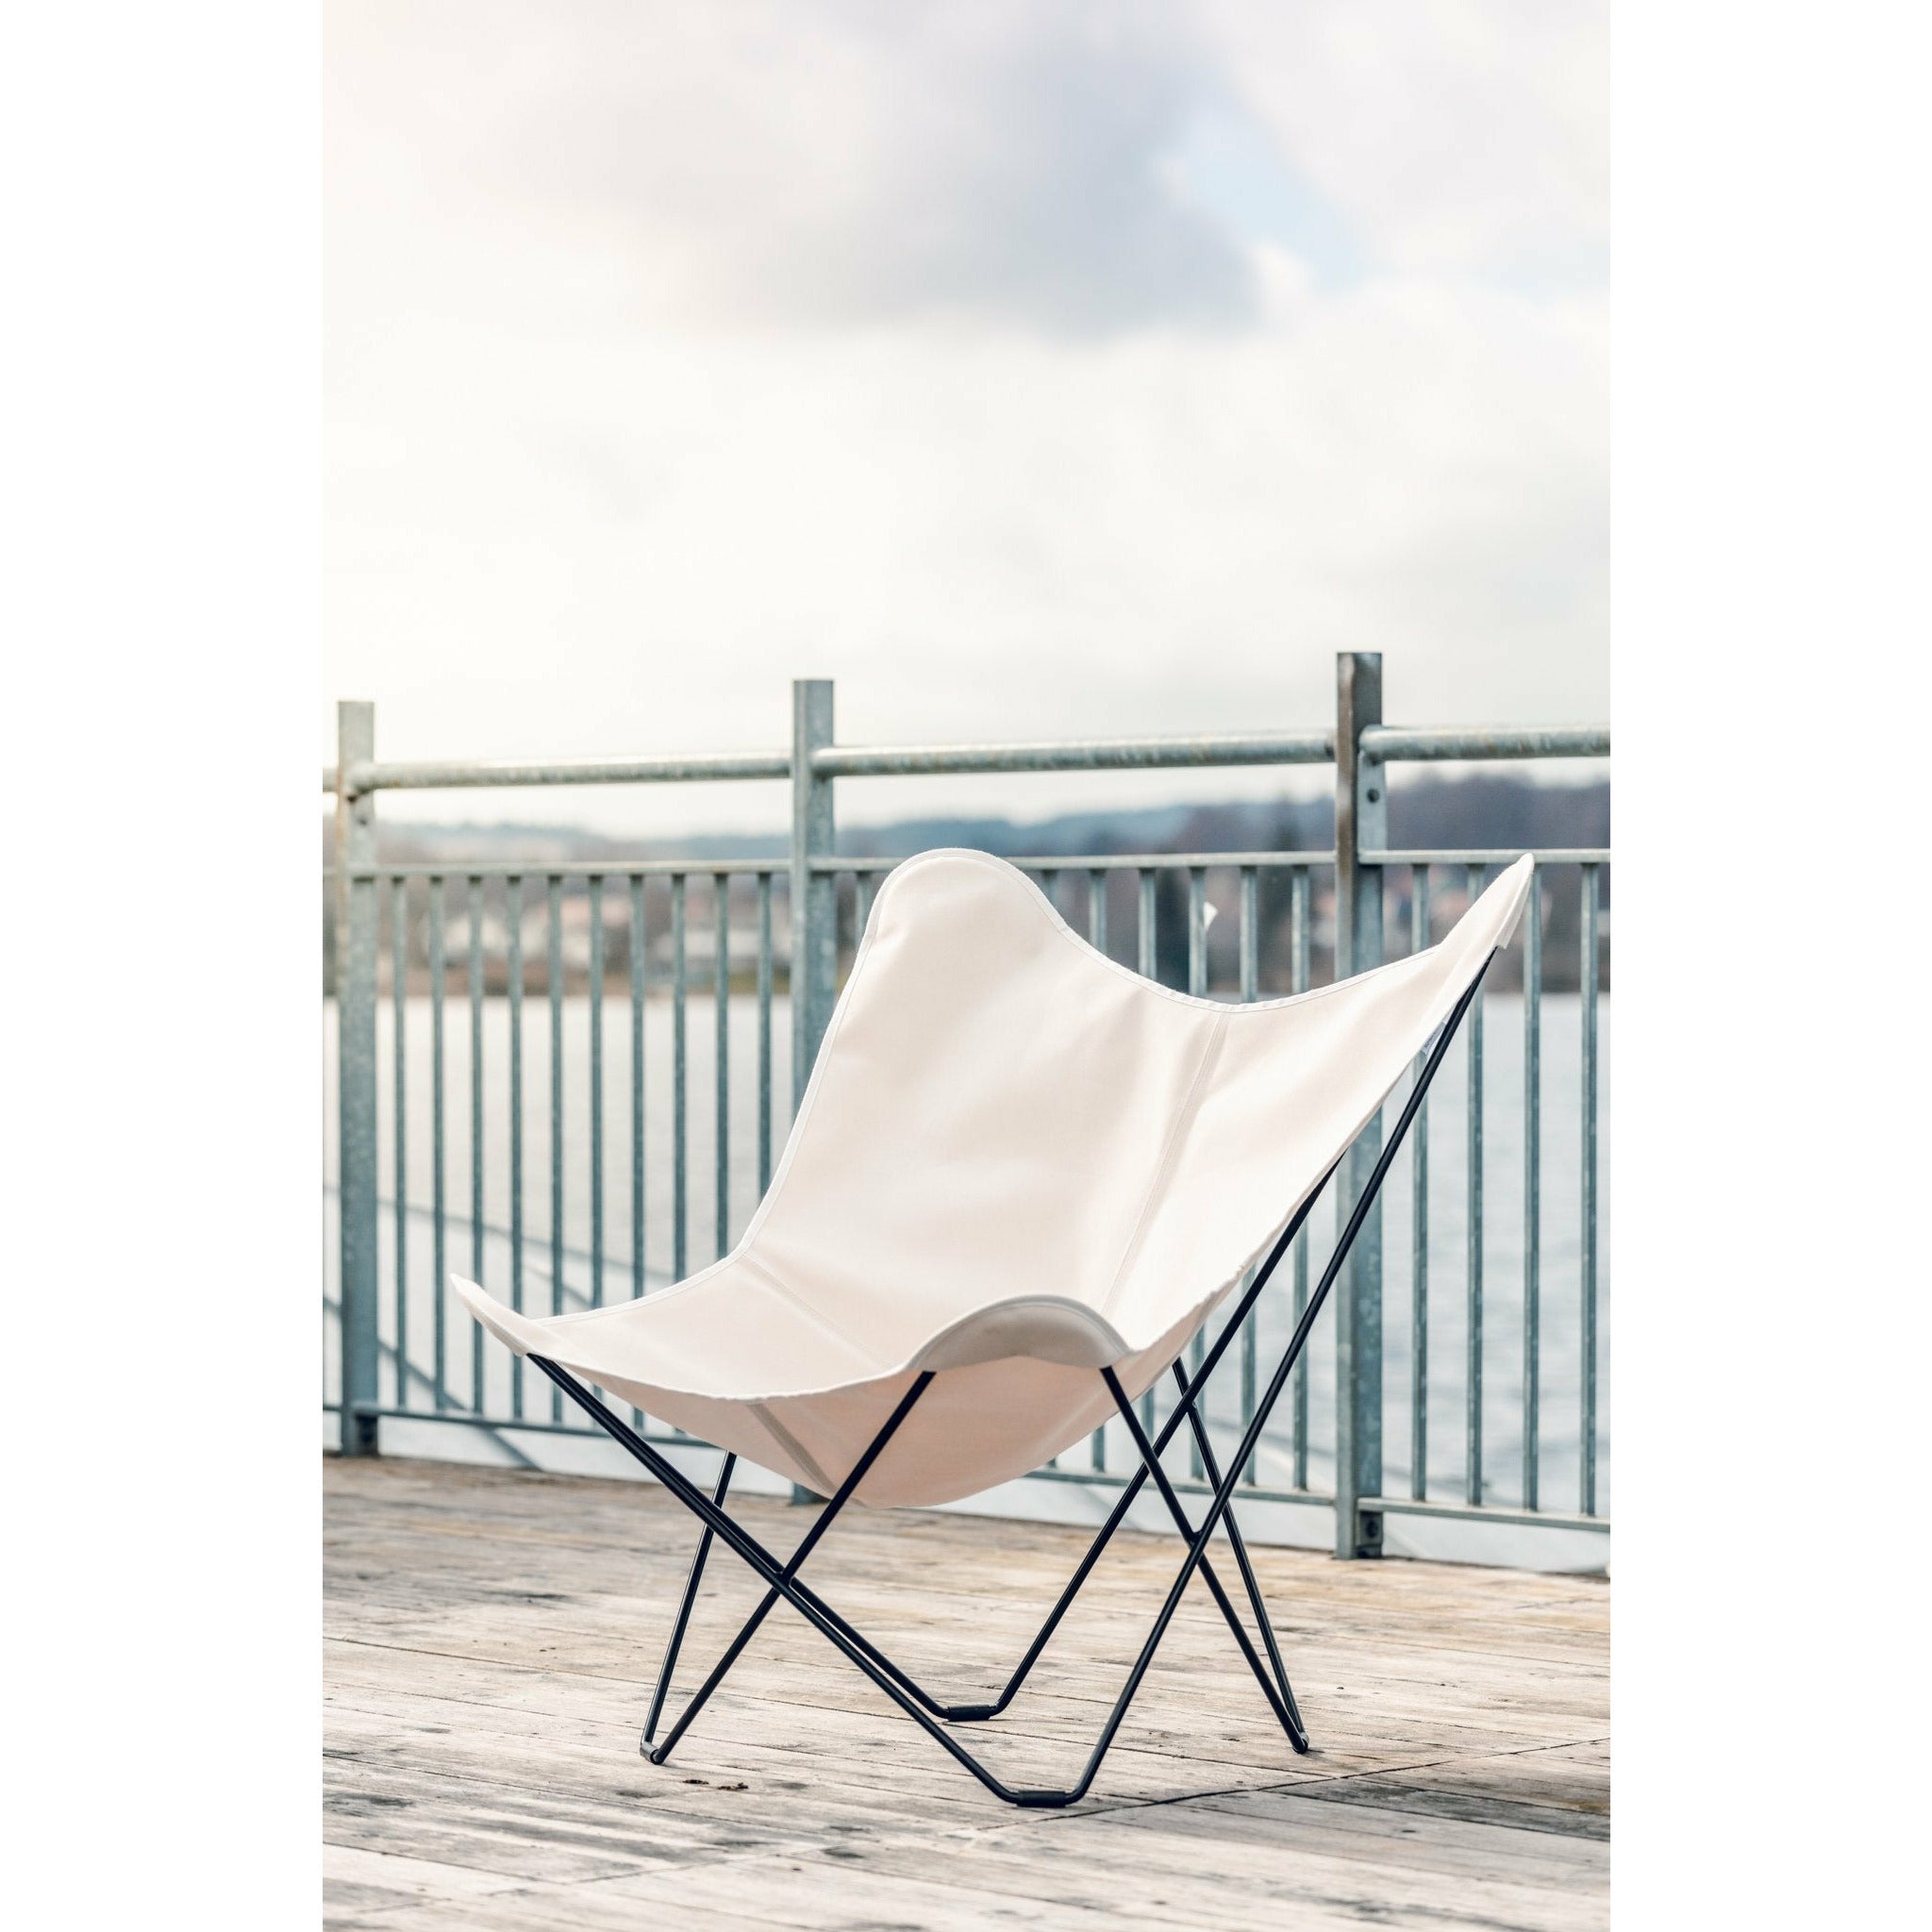 Cuero Sunshine Mariposa Butterfly Chair, Oyster/Grey Outdoor Frame